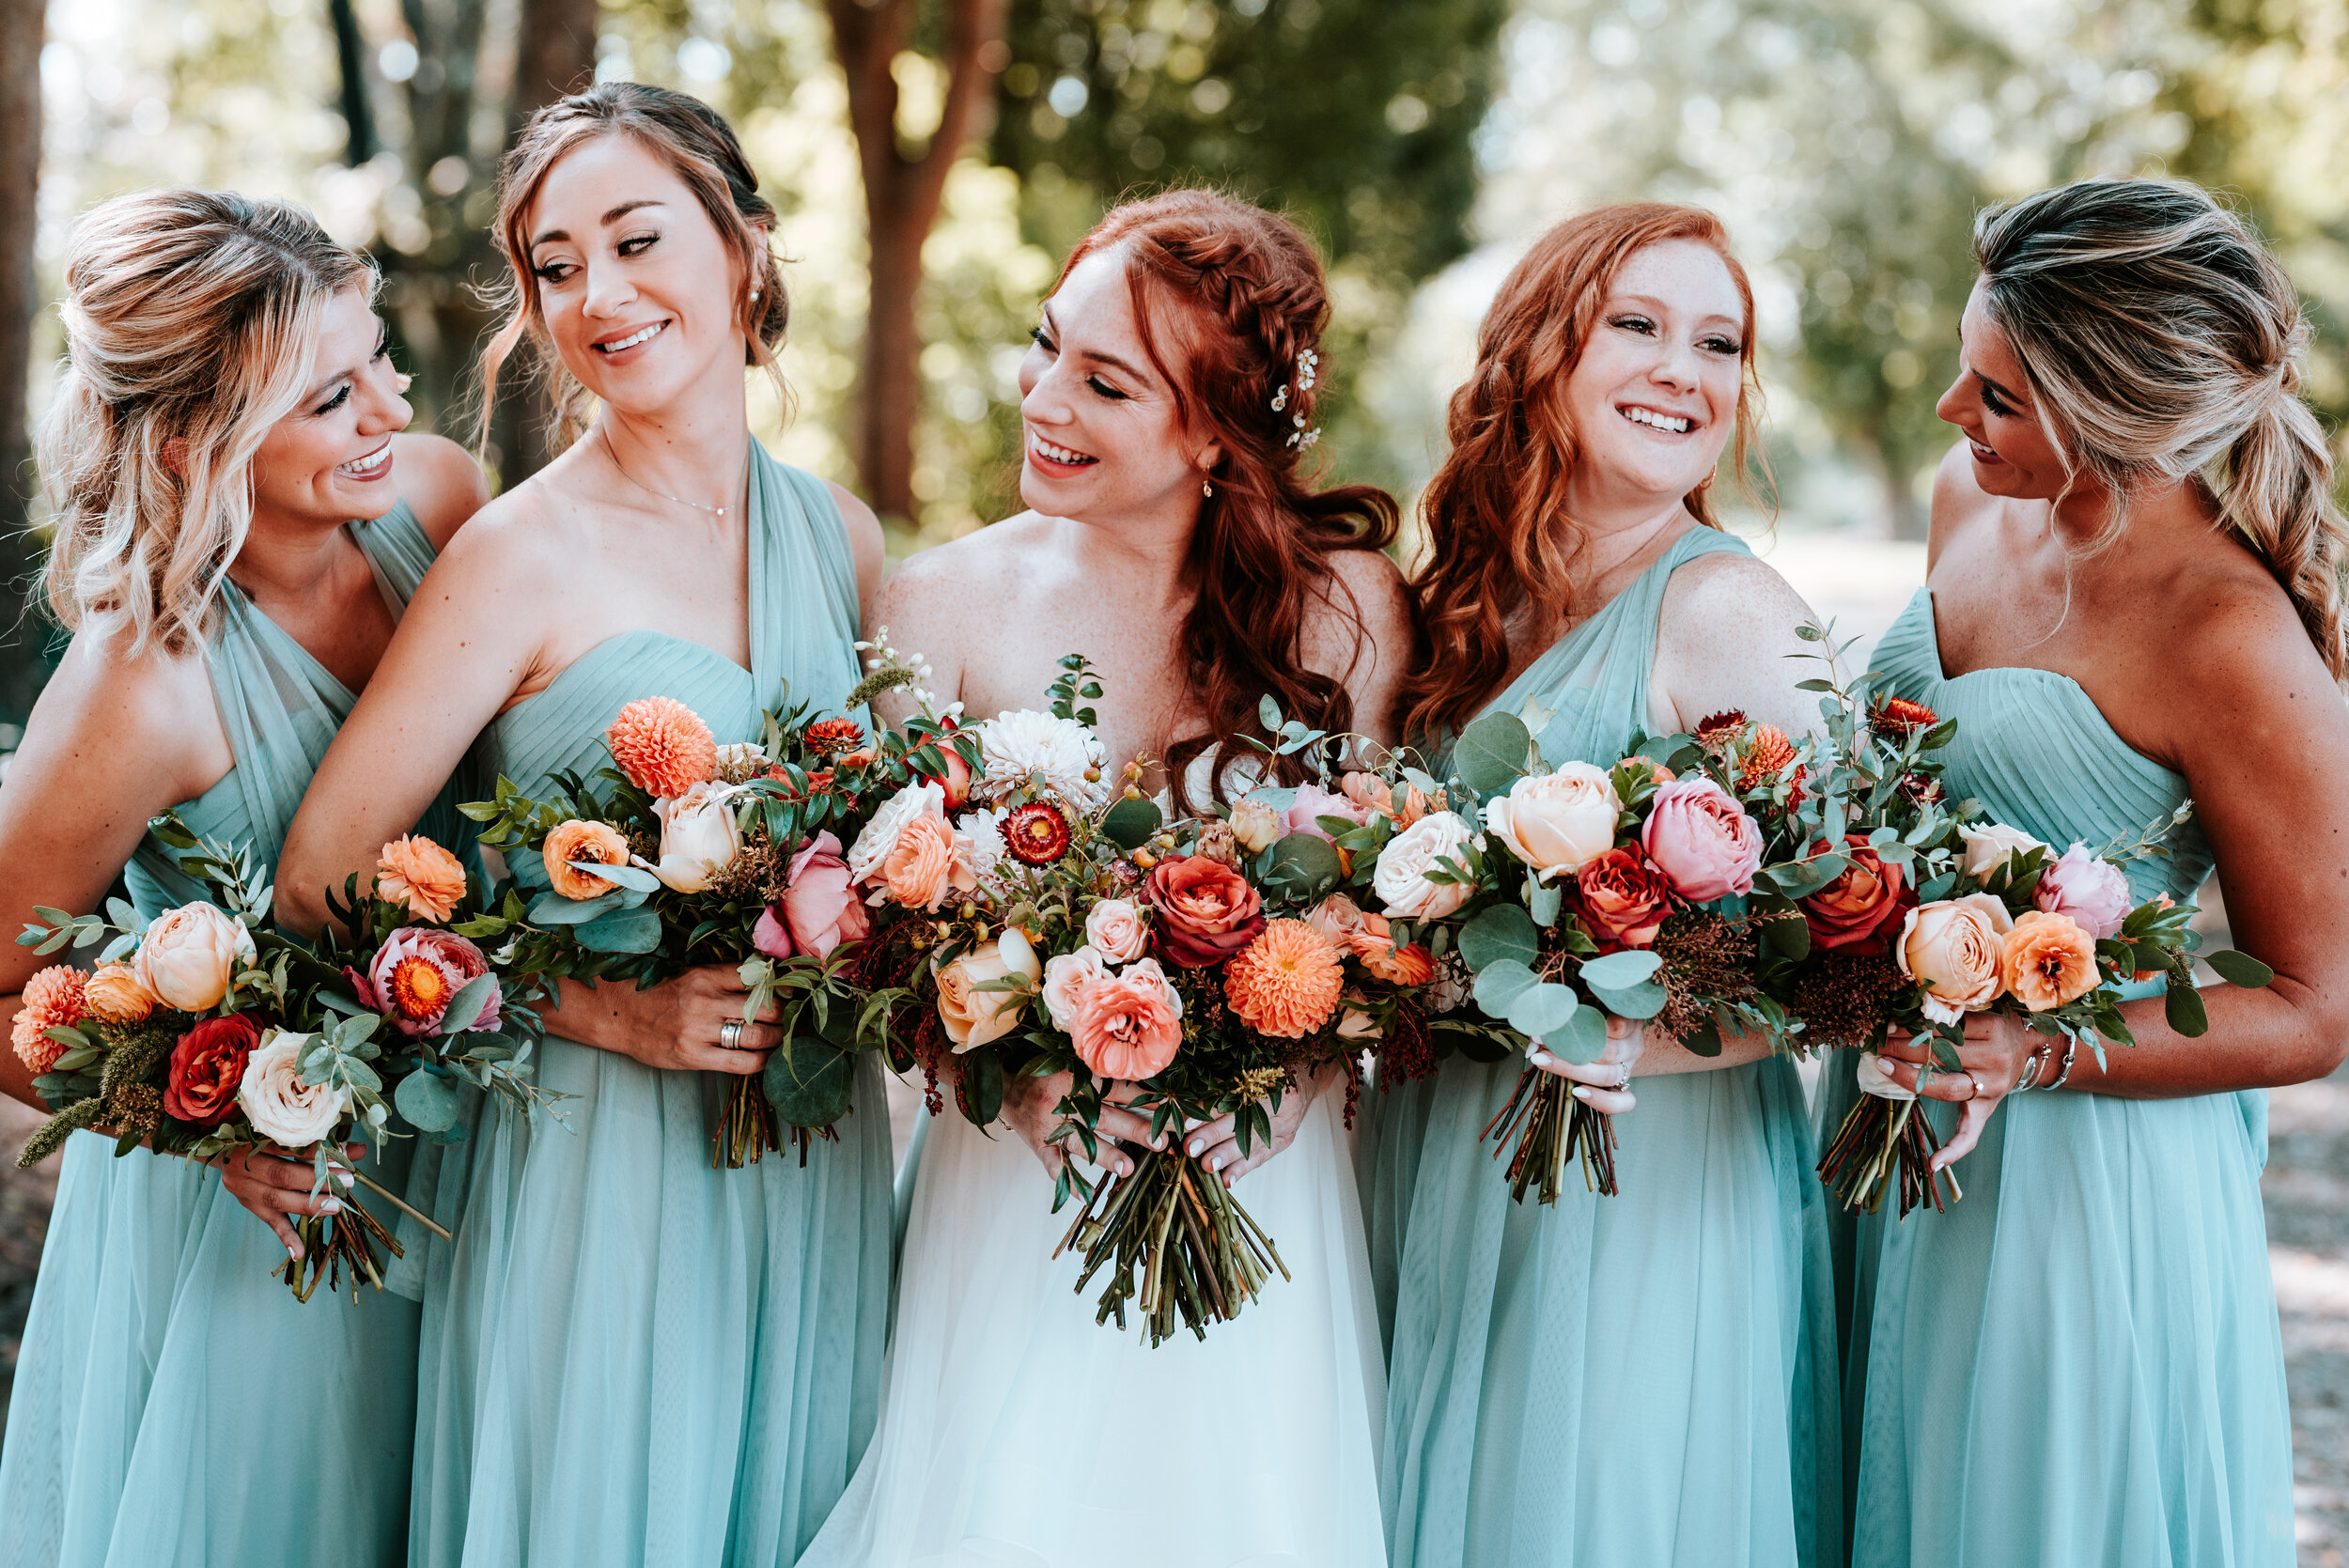 October wedding at Long Hollow Gardens with lush, asymmetrical flower arrangements in a rusty orange and soft peach color palette. Nashville wedding floral design.